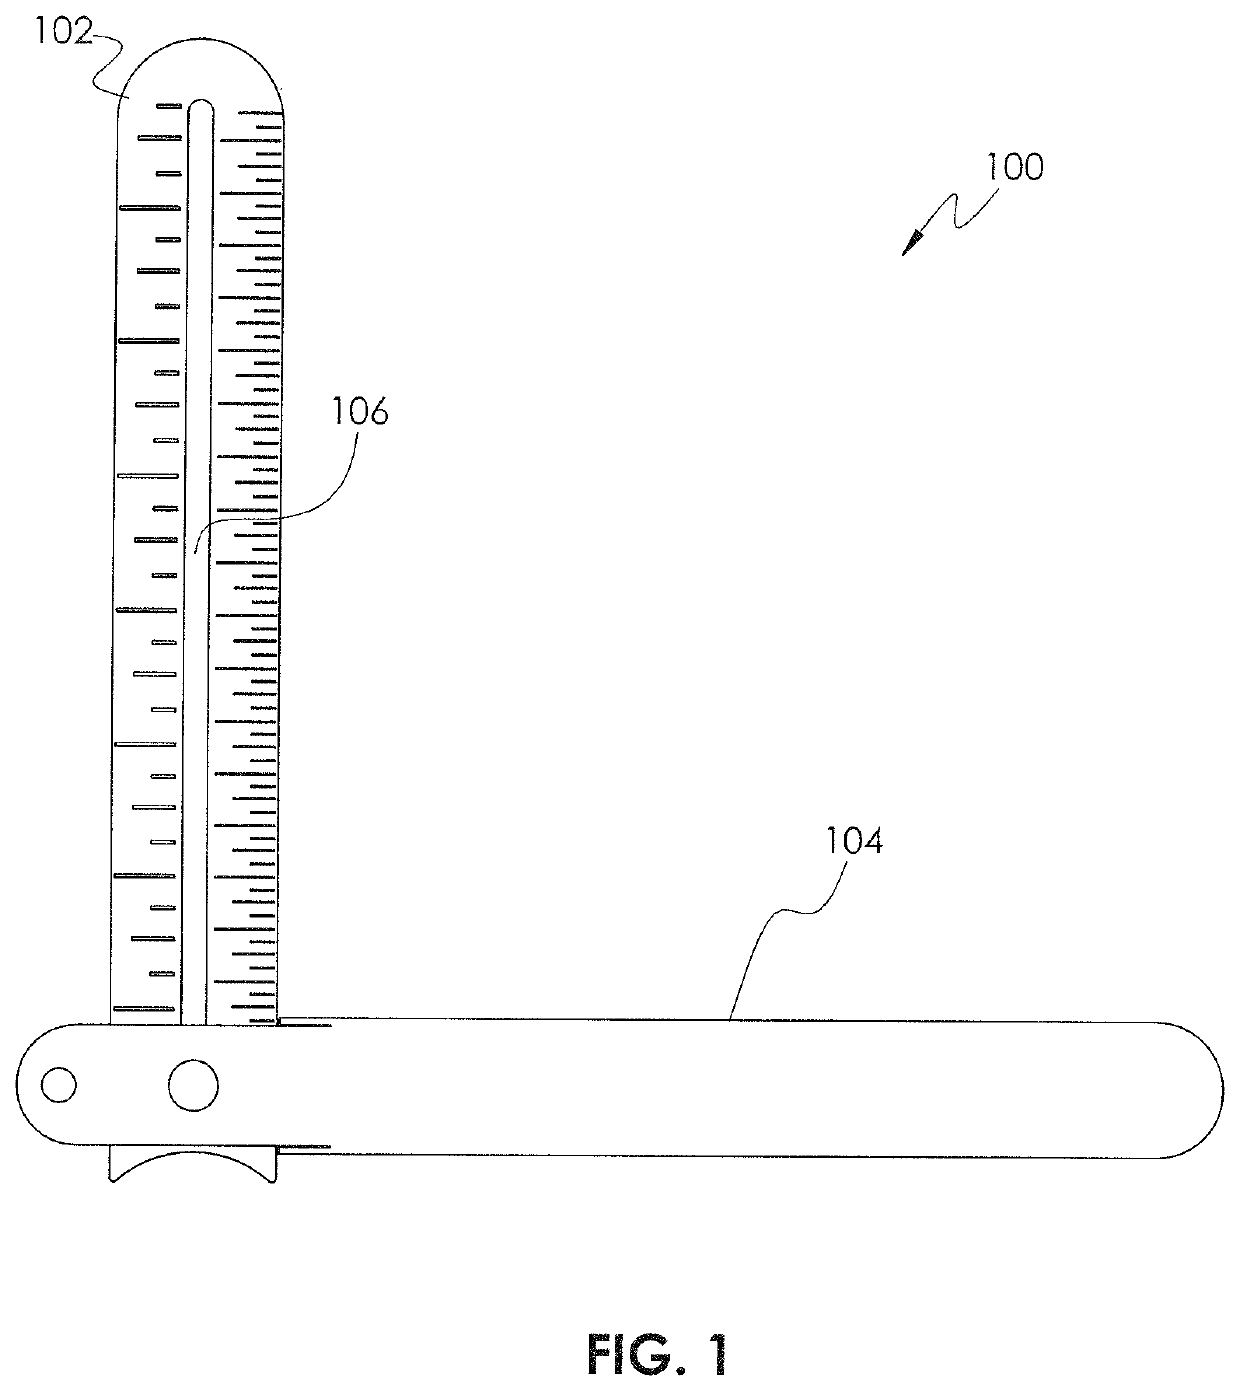 Knee goniometer to measure knee extension difference and extensor length